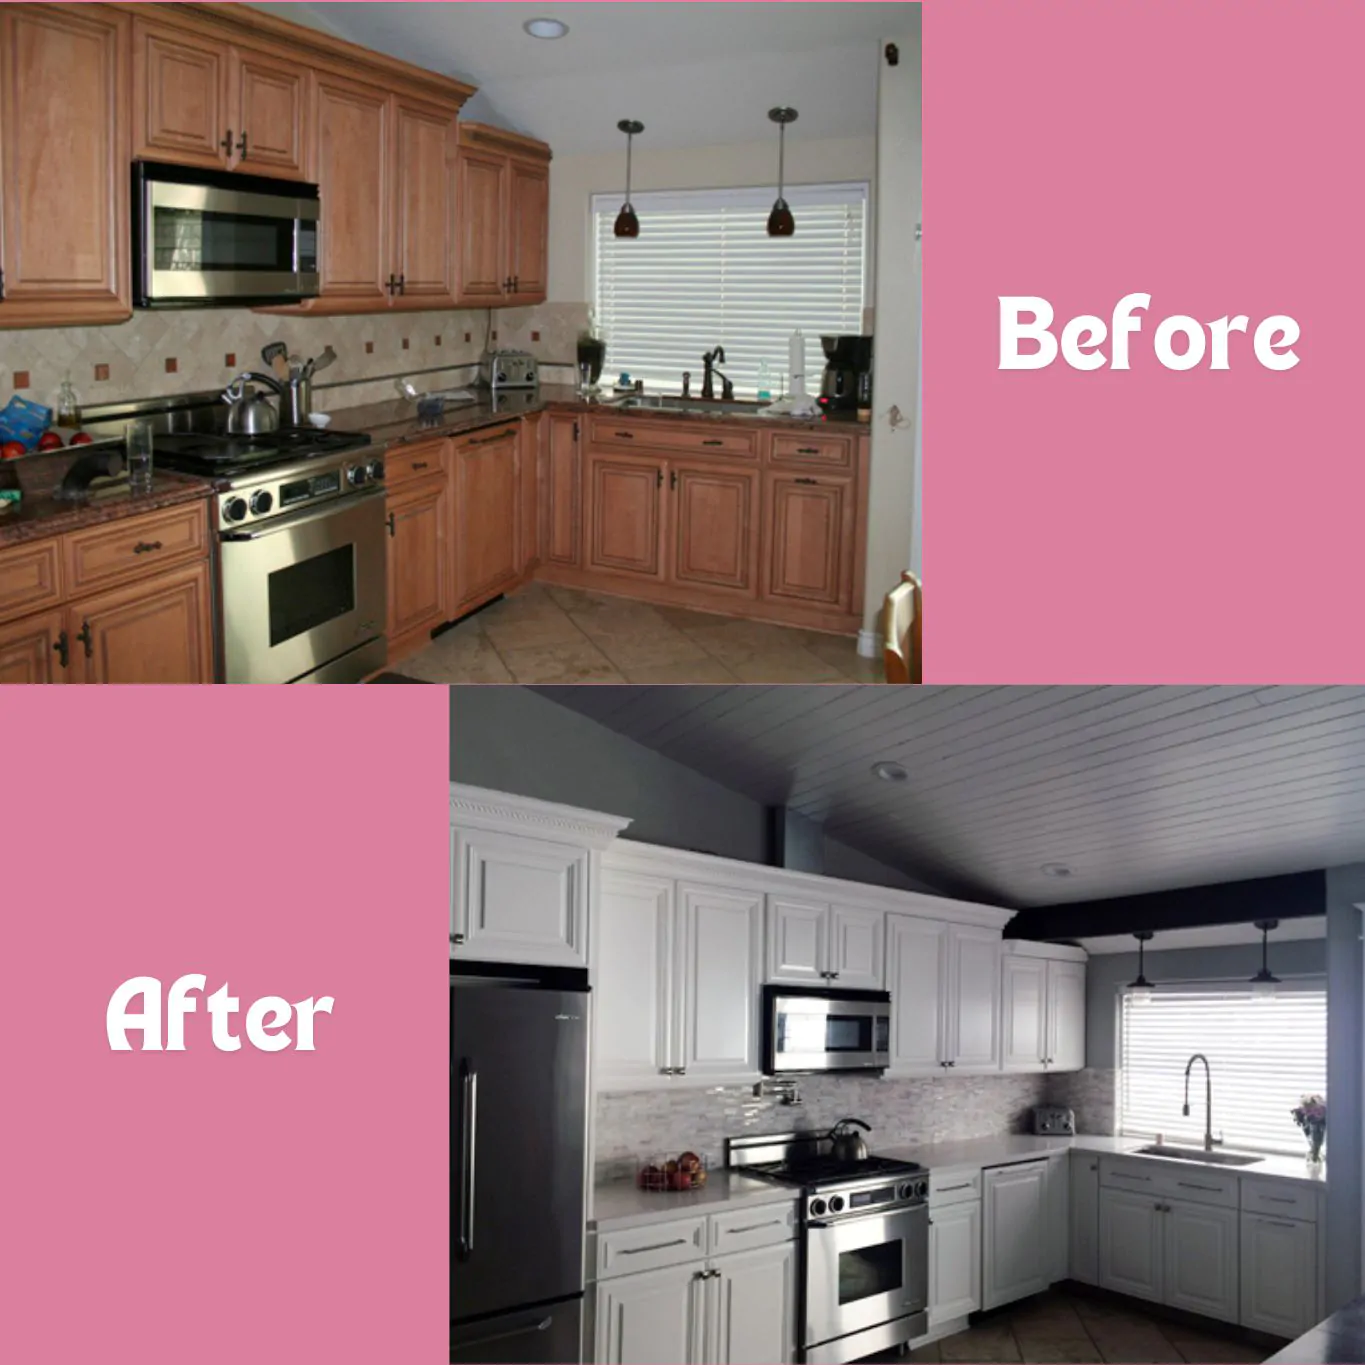 Before and After Kitchen Remodeling Services